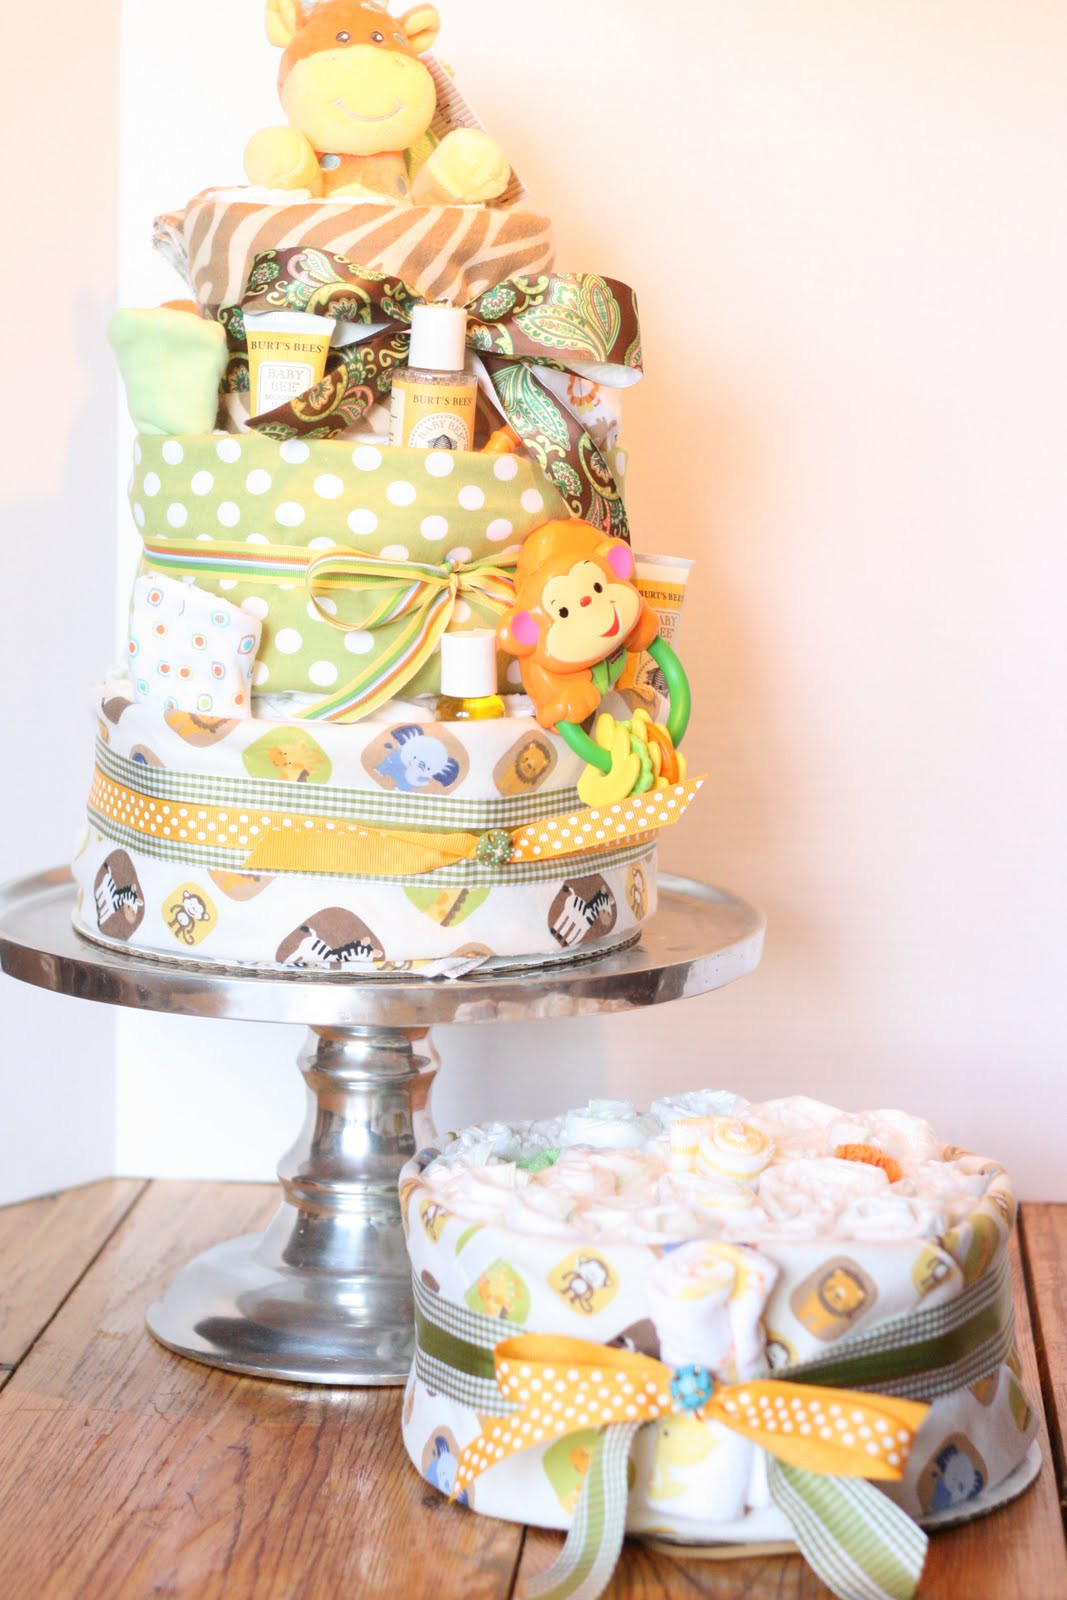 Diaper Gift Ideas For Baby Shower
 25 DIY Baby Shower Gifts for the Little Boy on the Wa